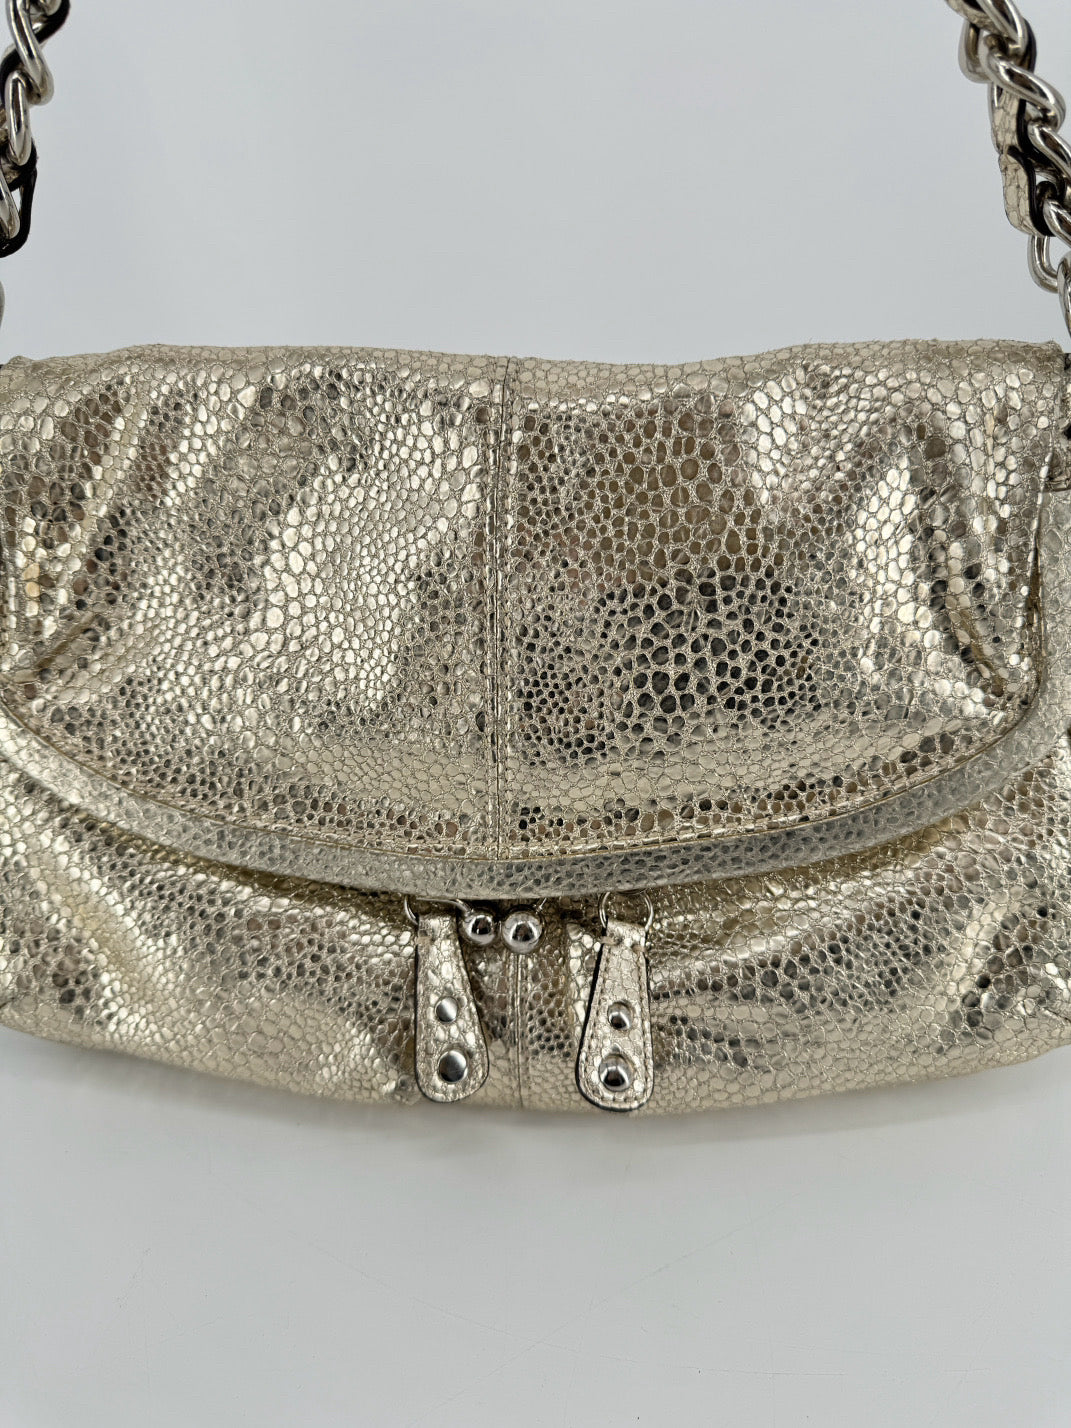 COACH Silver Textured Leather Frame Fold Over Hobo Purse